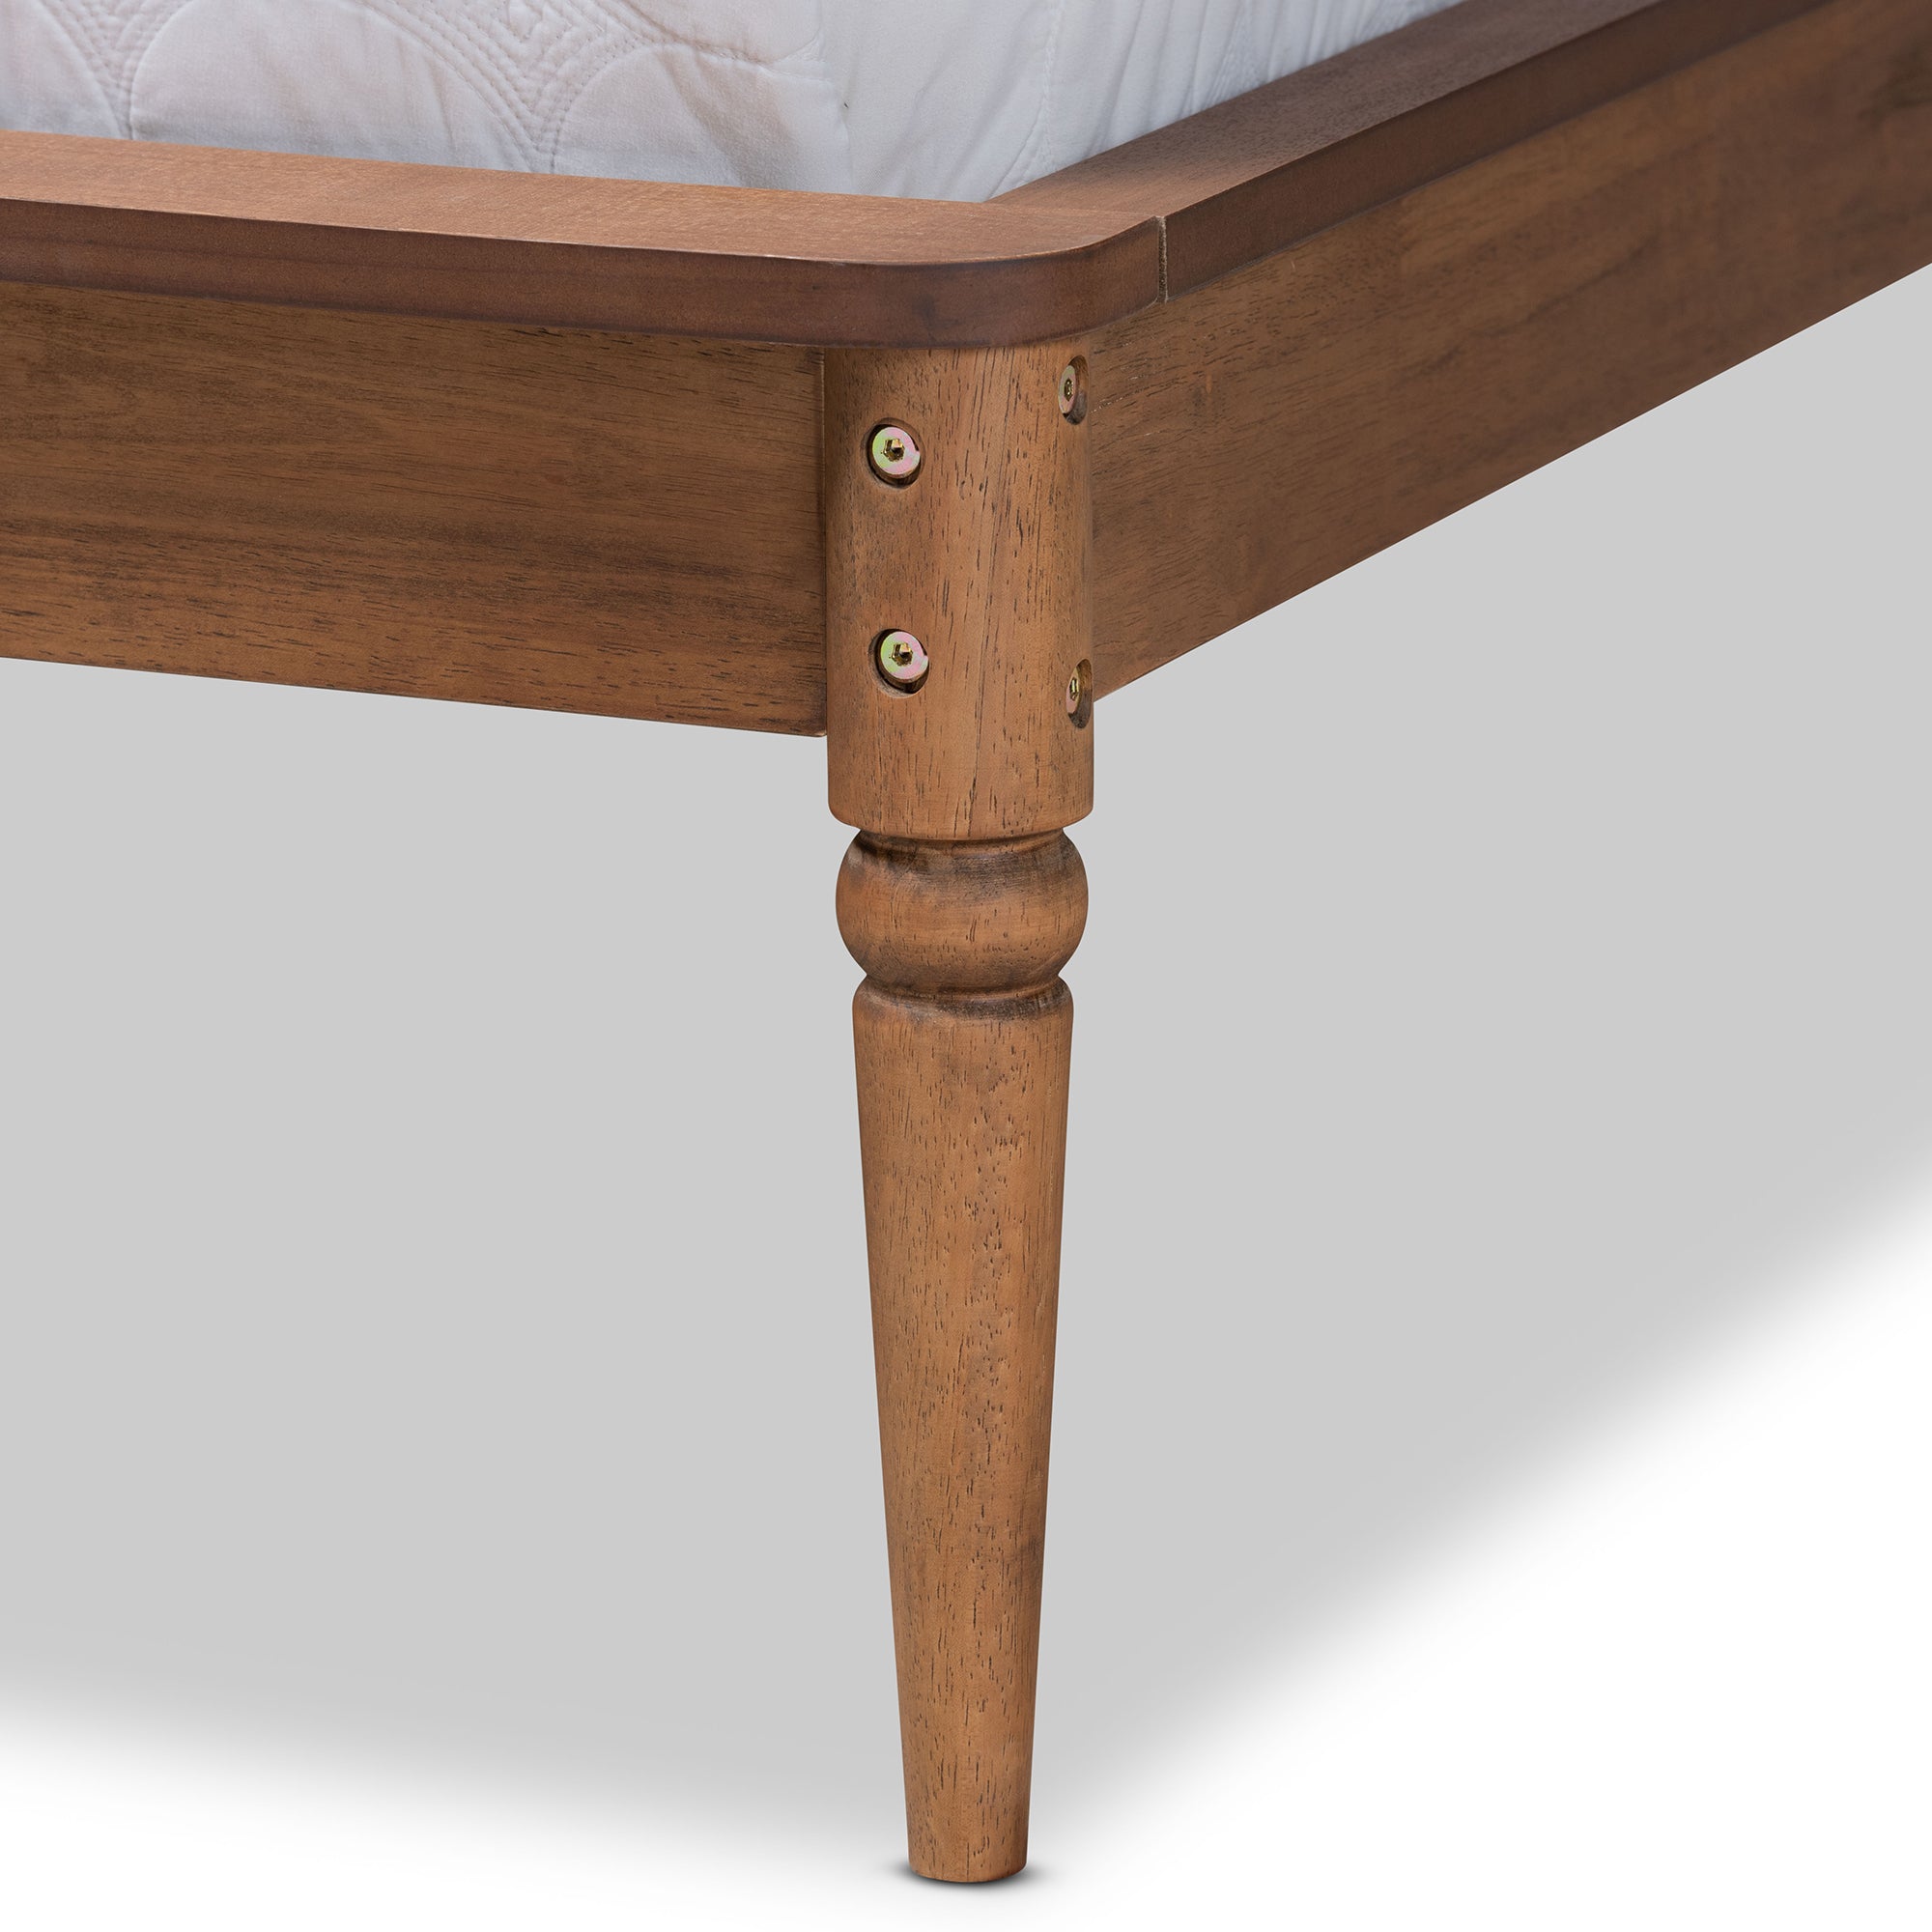 Tallis Traditional Bed Frame-Bed Frame-Baxton Studio - WI-Wall2Wall Furnishings